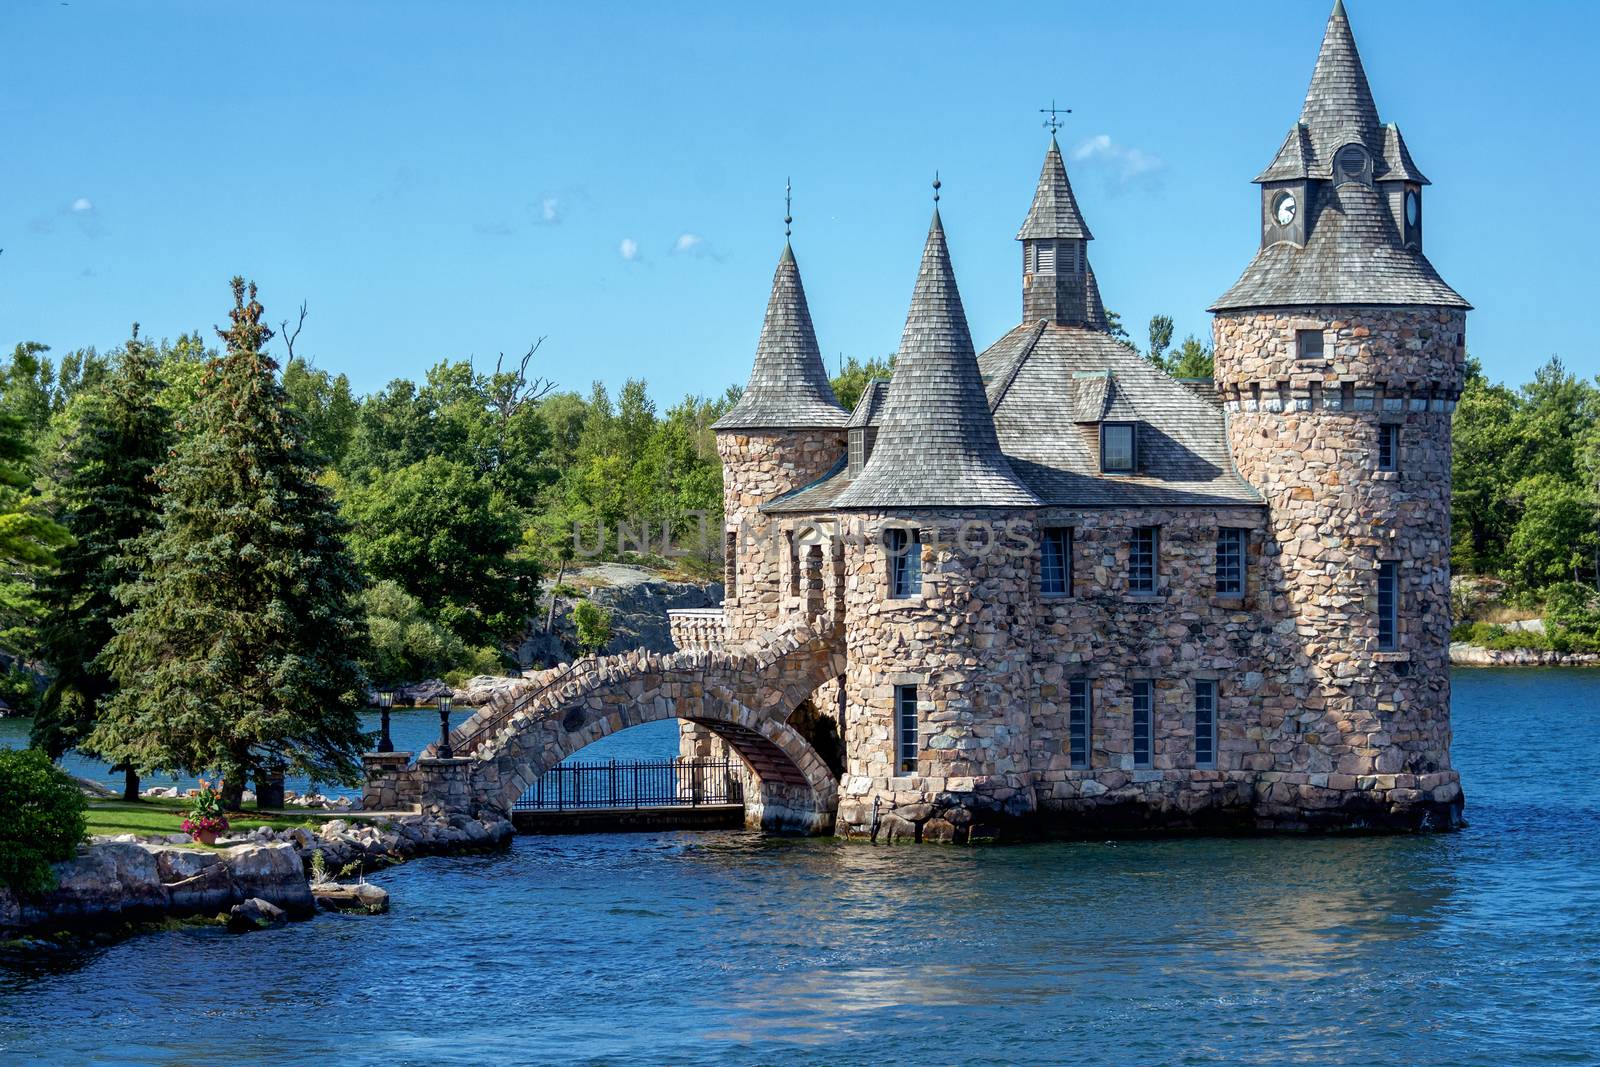 Castle with a bridge on the water near the island by ben44